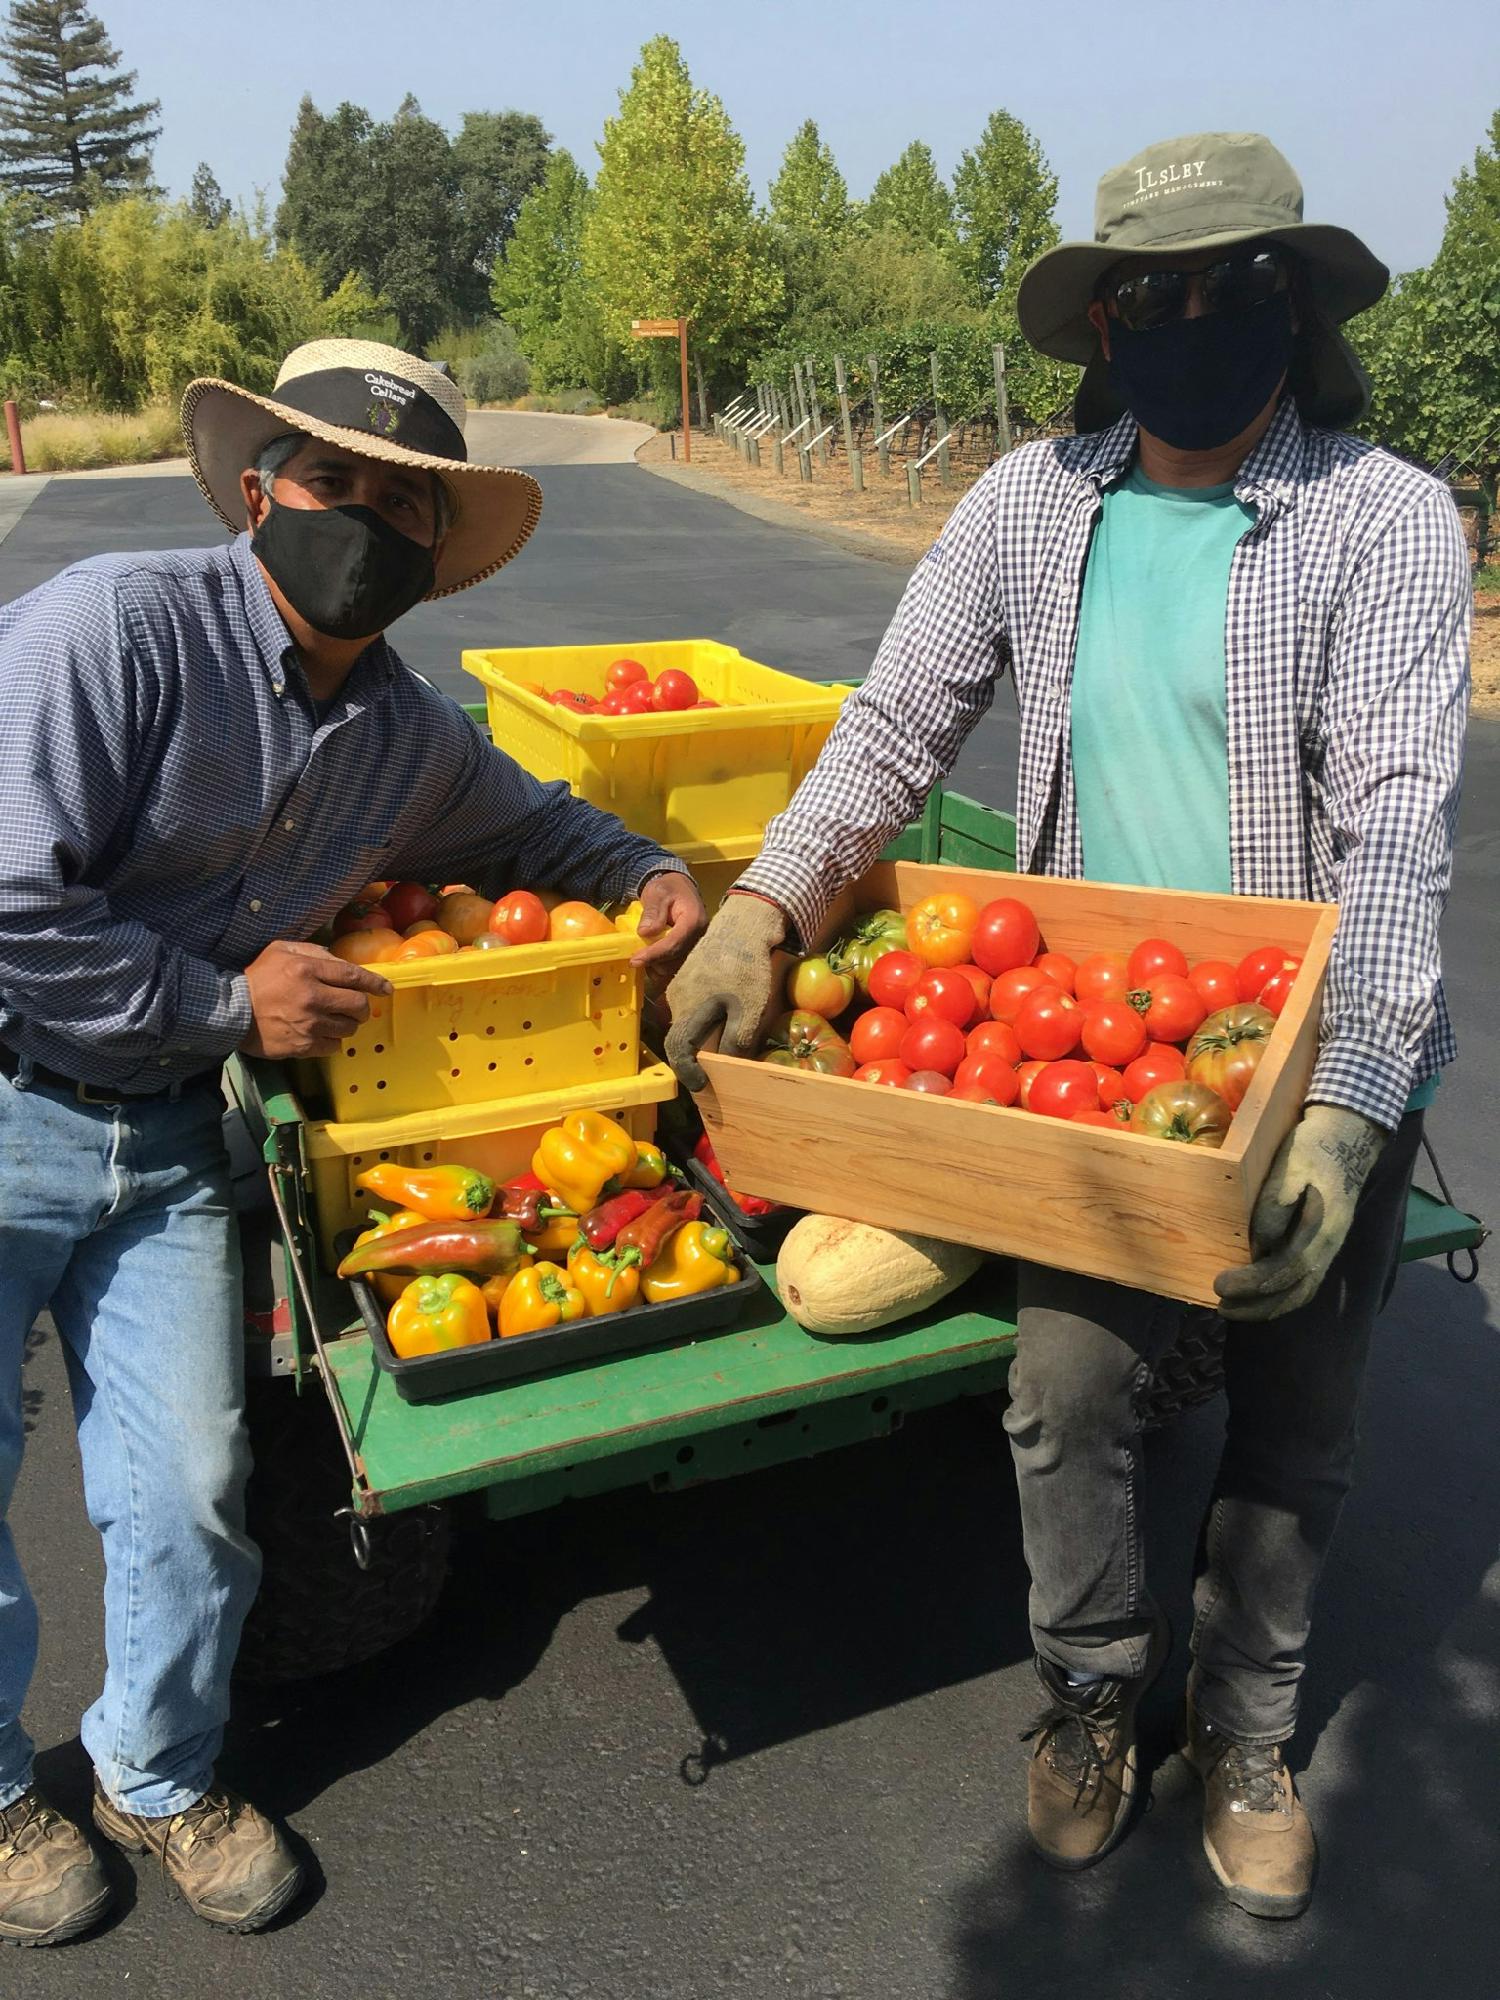 Our Landscaping & Gardening team bringing employees fresh produce from the Cakebread Garden to enjoy with their families